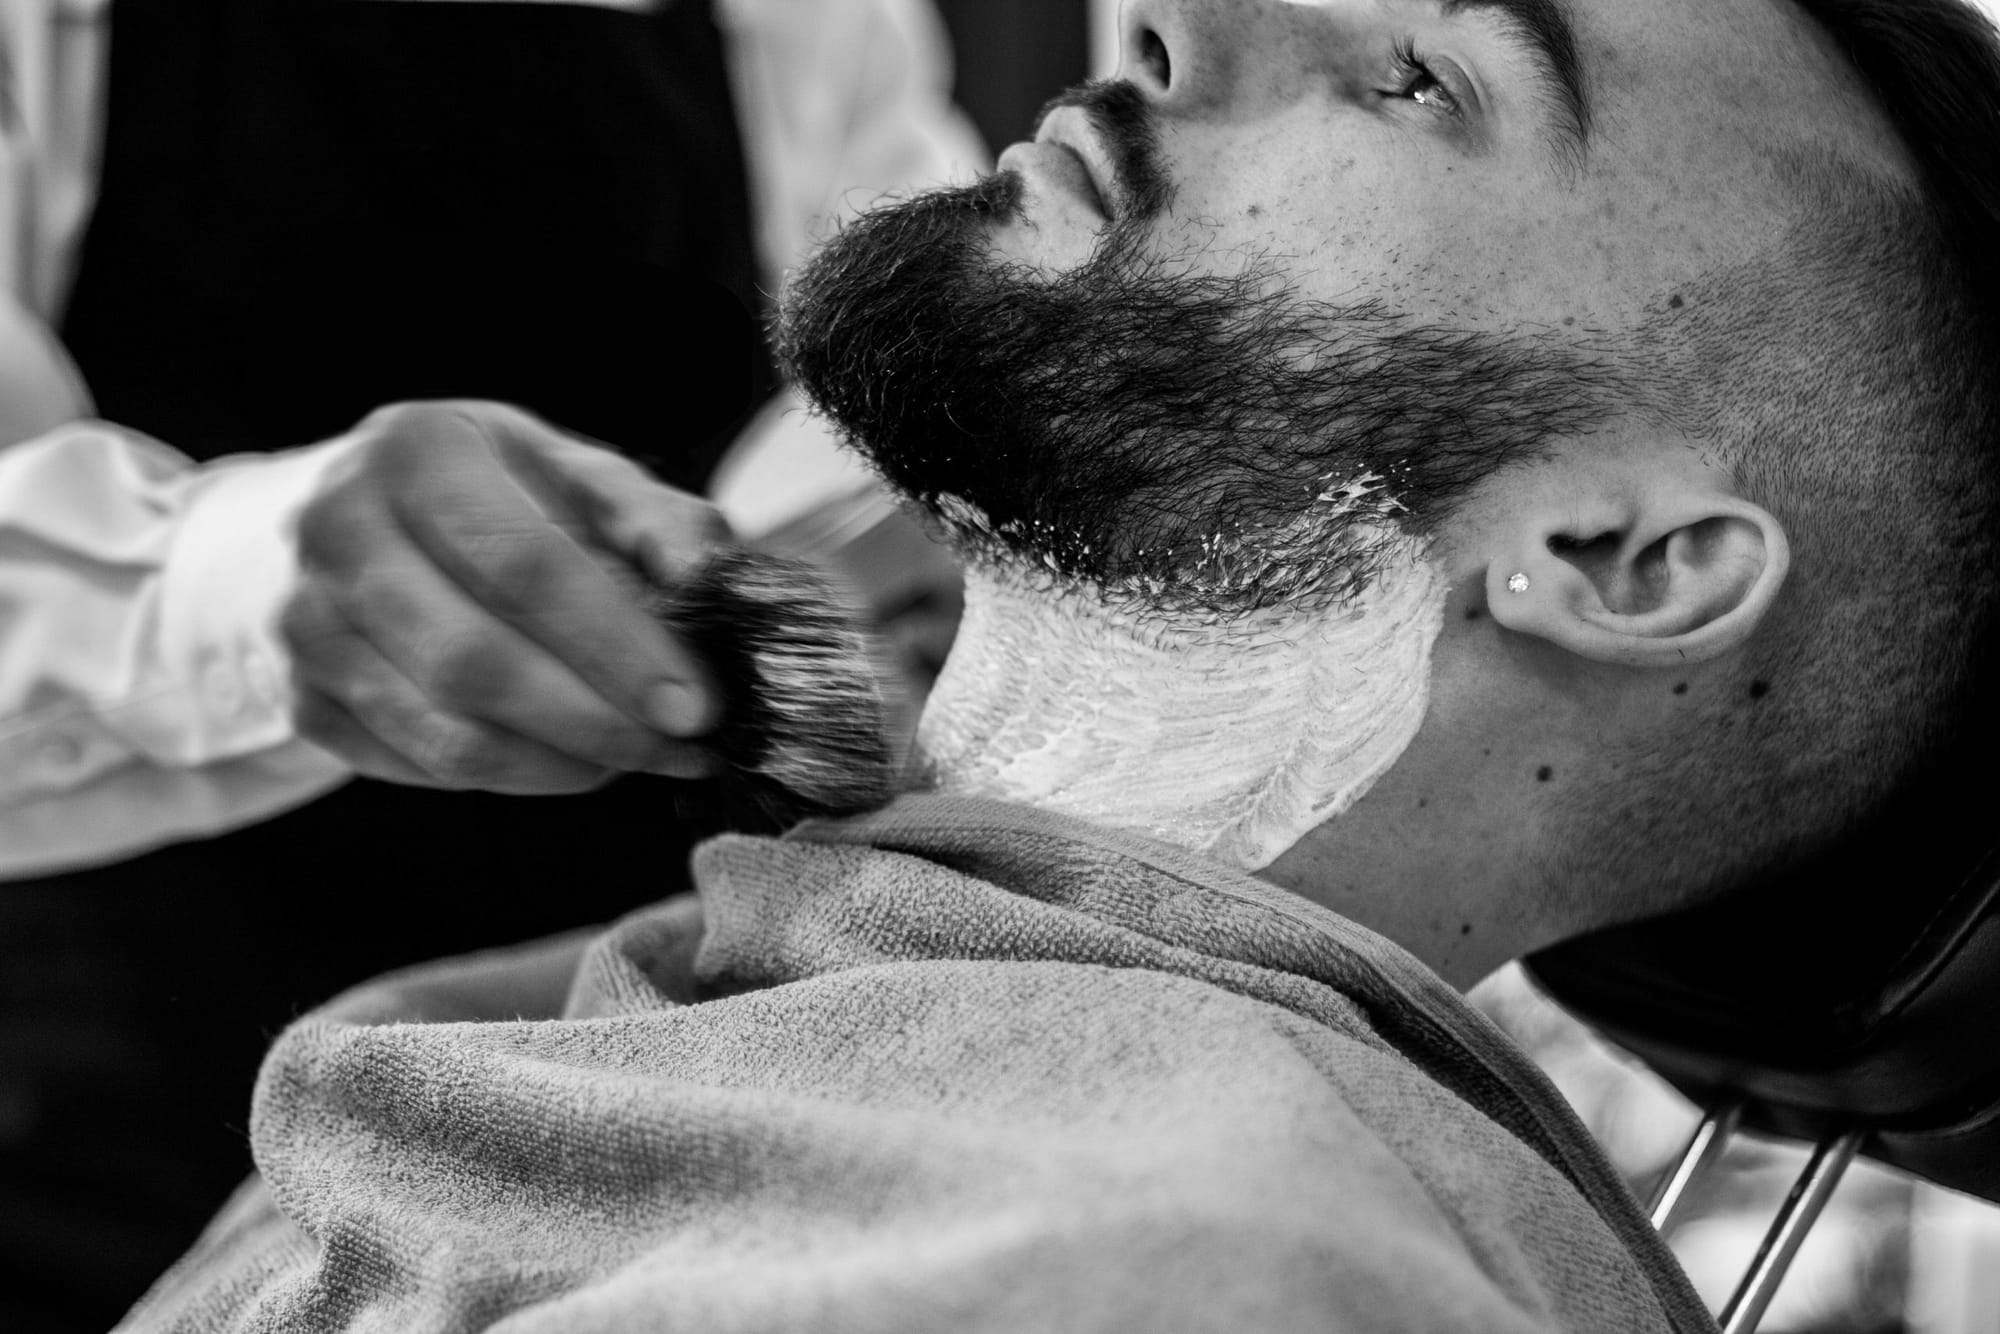 A barber prepares a man for a shave